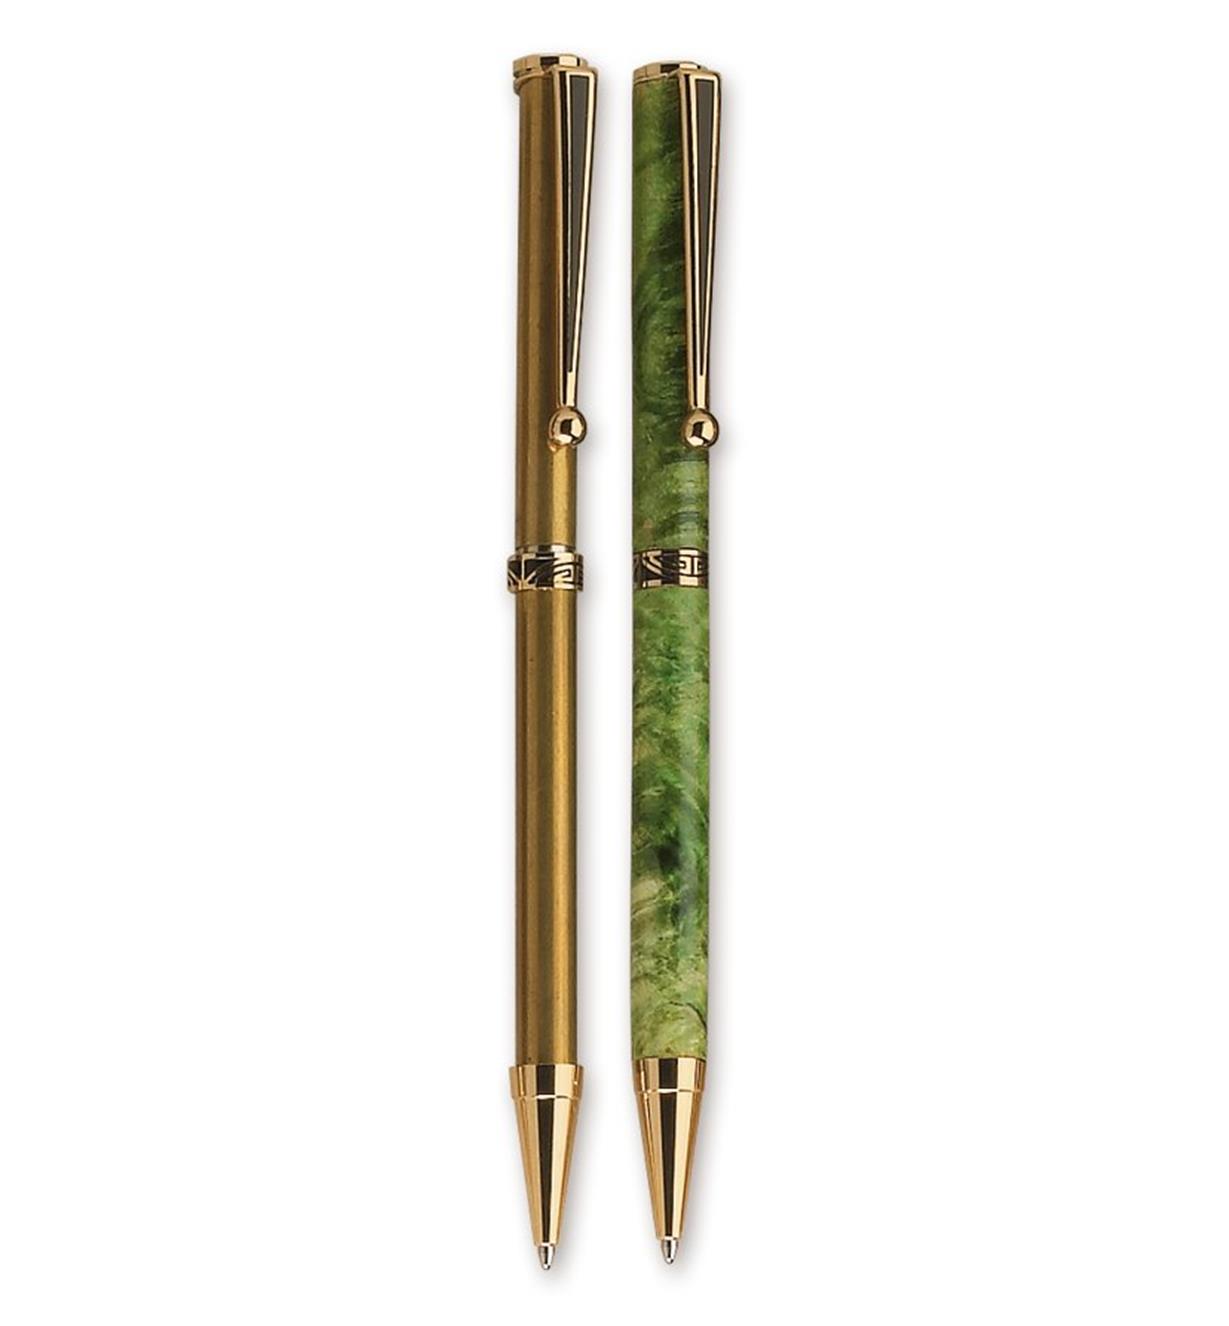 Example of completed Slim-Style Deco Pen beside pen hardware